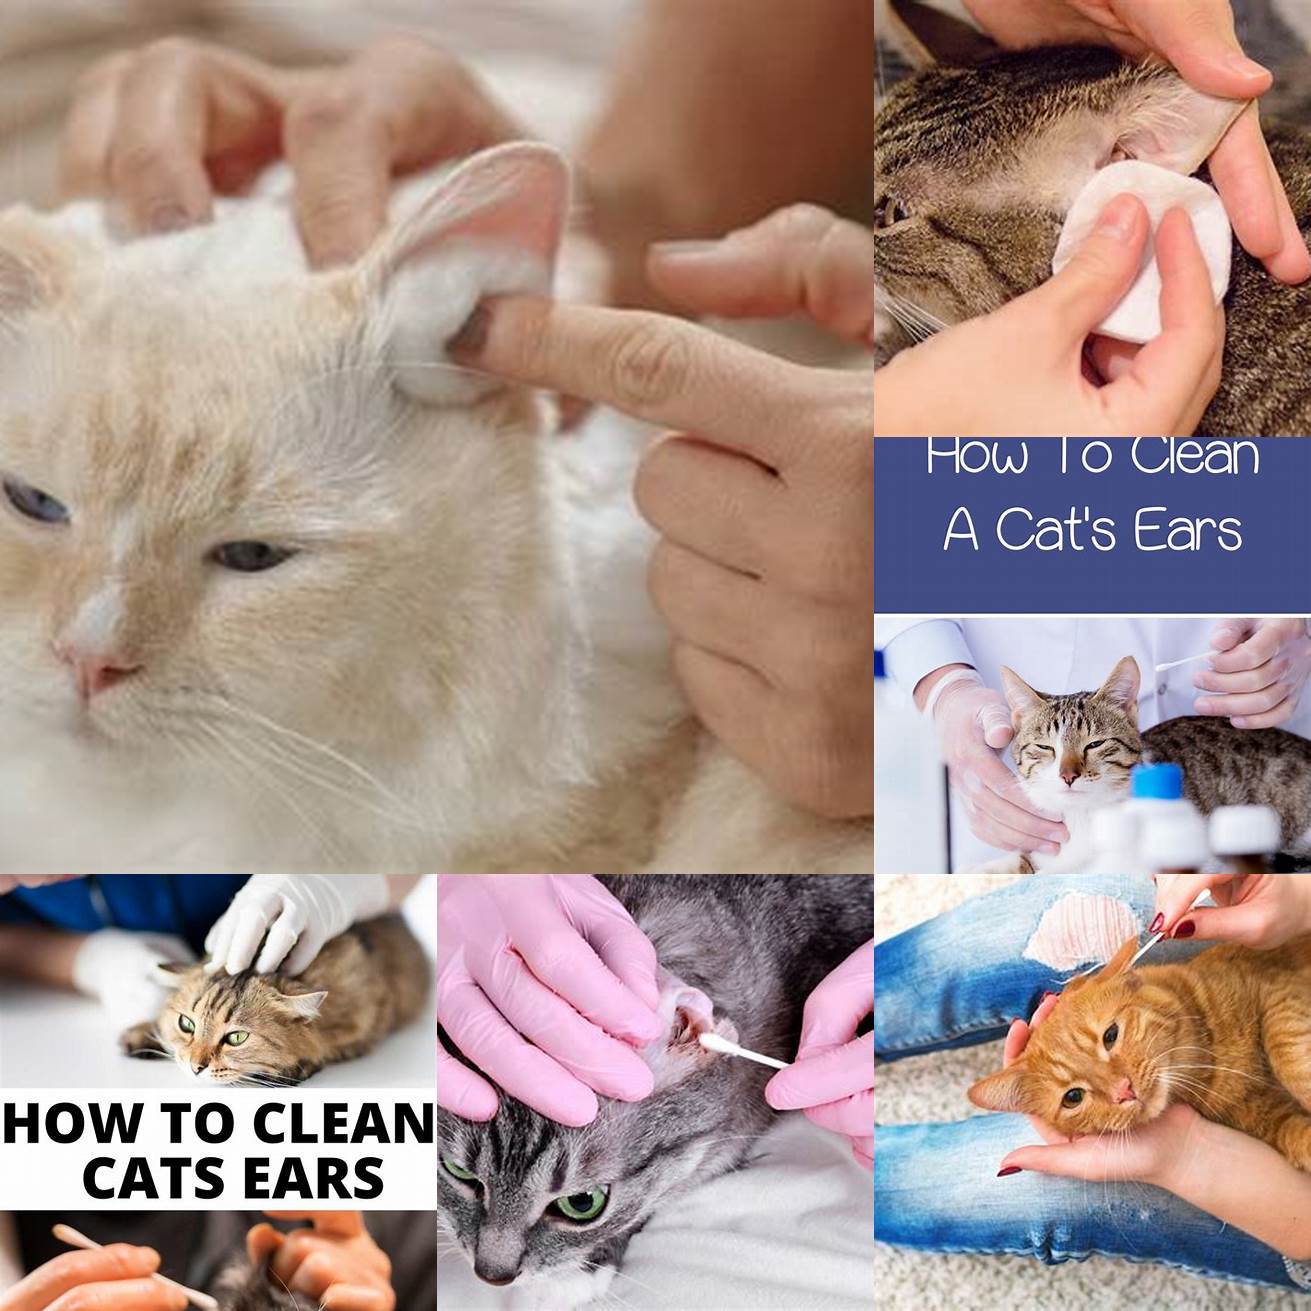 Clean your cats ears regularly